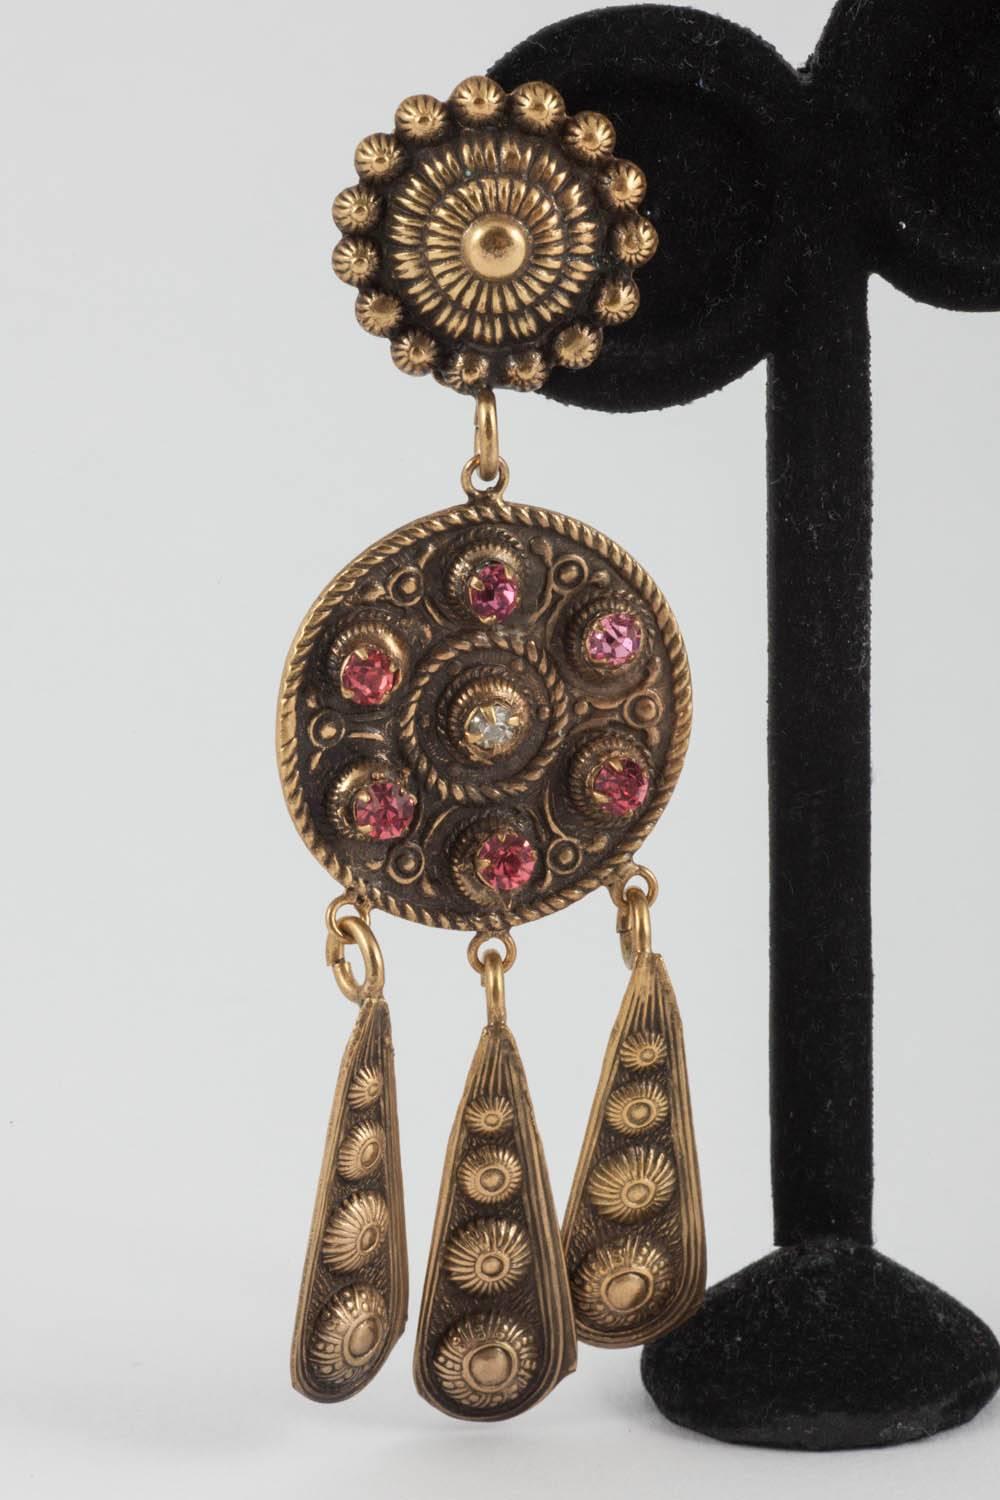 These earrings have quite a Byzantine feel to them. They are on a grand scale but very light to wear. 
Eugene Joseff created ‘Joseff of Hollywood’ jewellery for the movies from 1935 until his death in 1948. His wife Joan Castle carried on his work